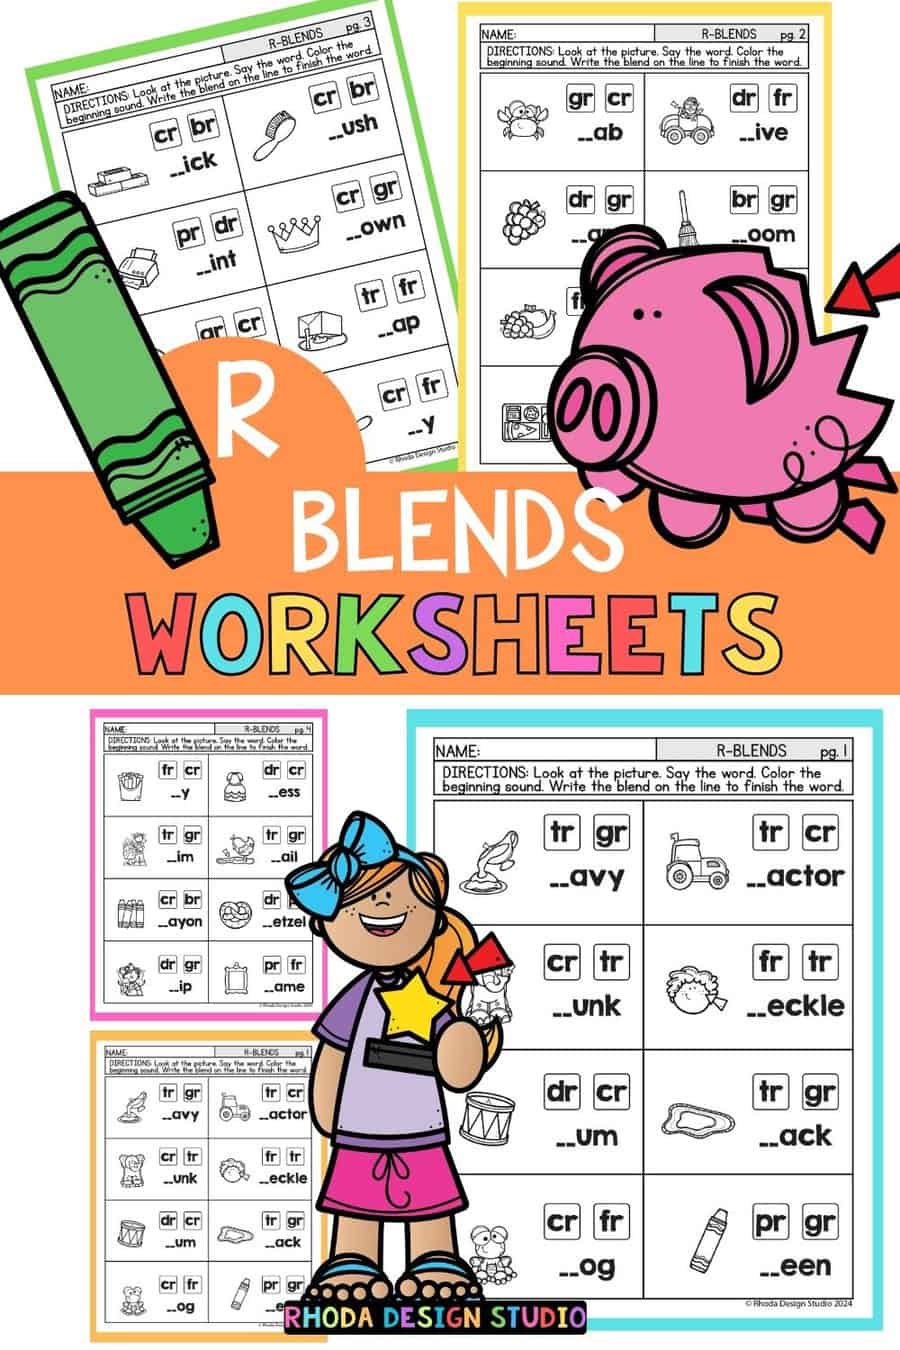 10 Ways to Master R-Blends with Engaging Activities